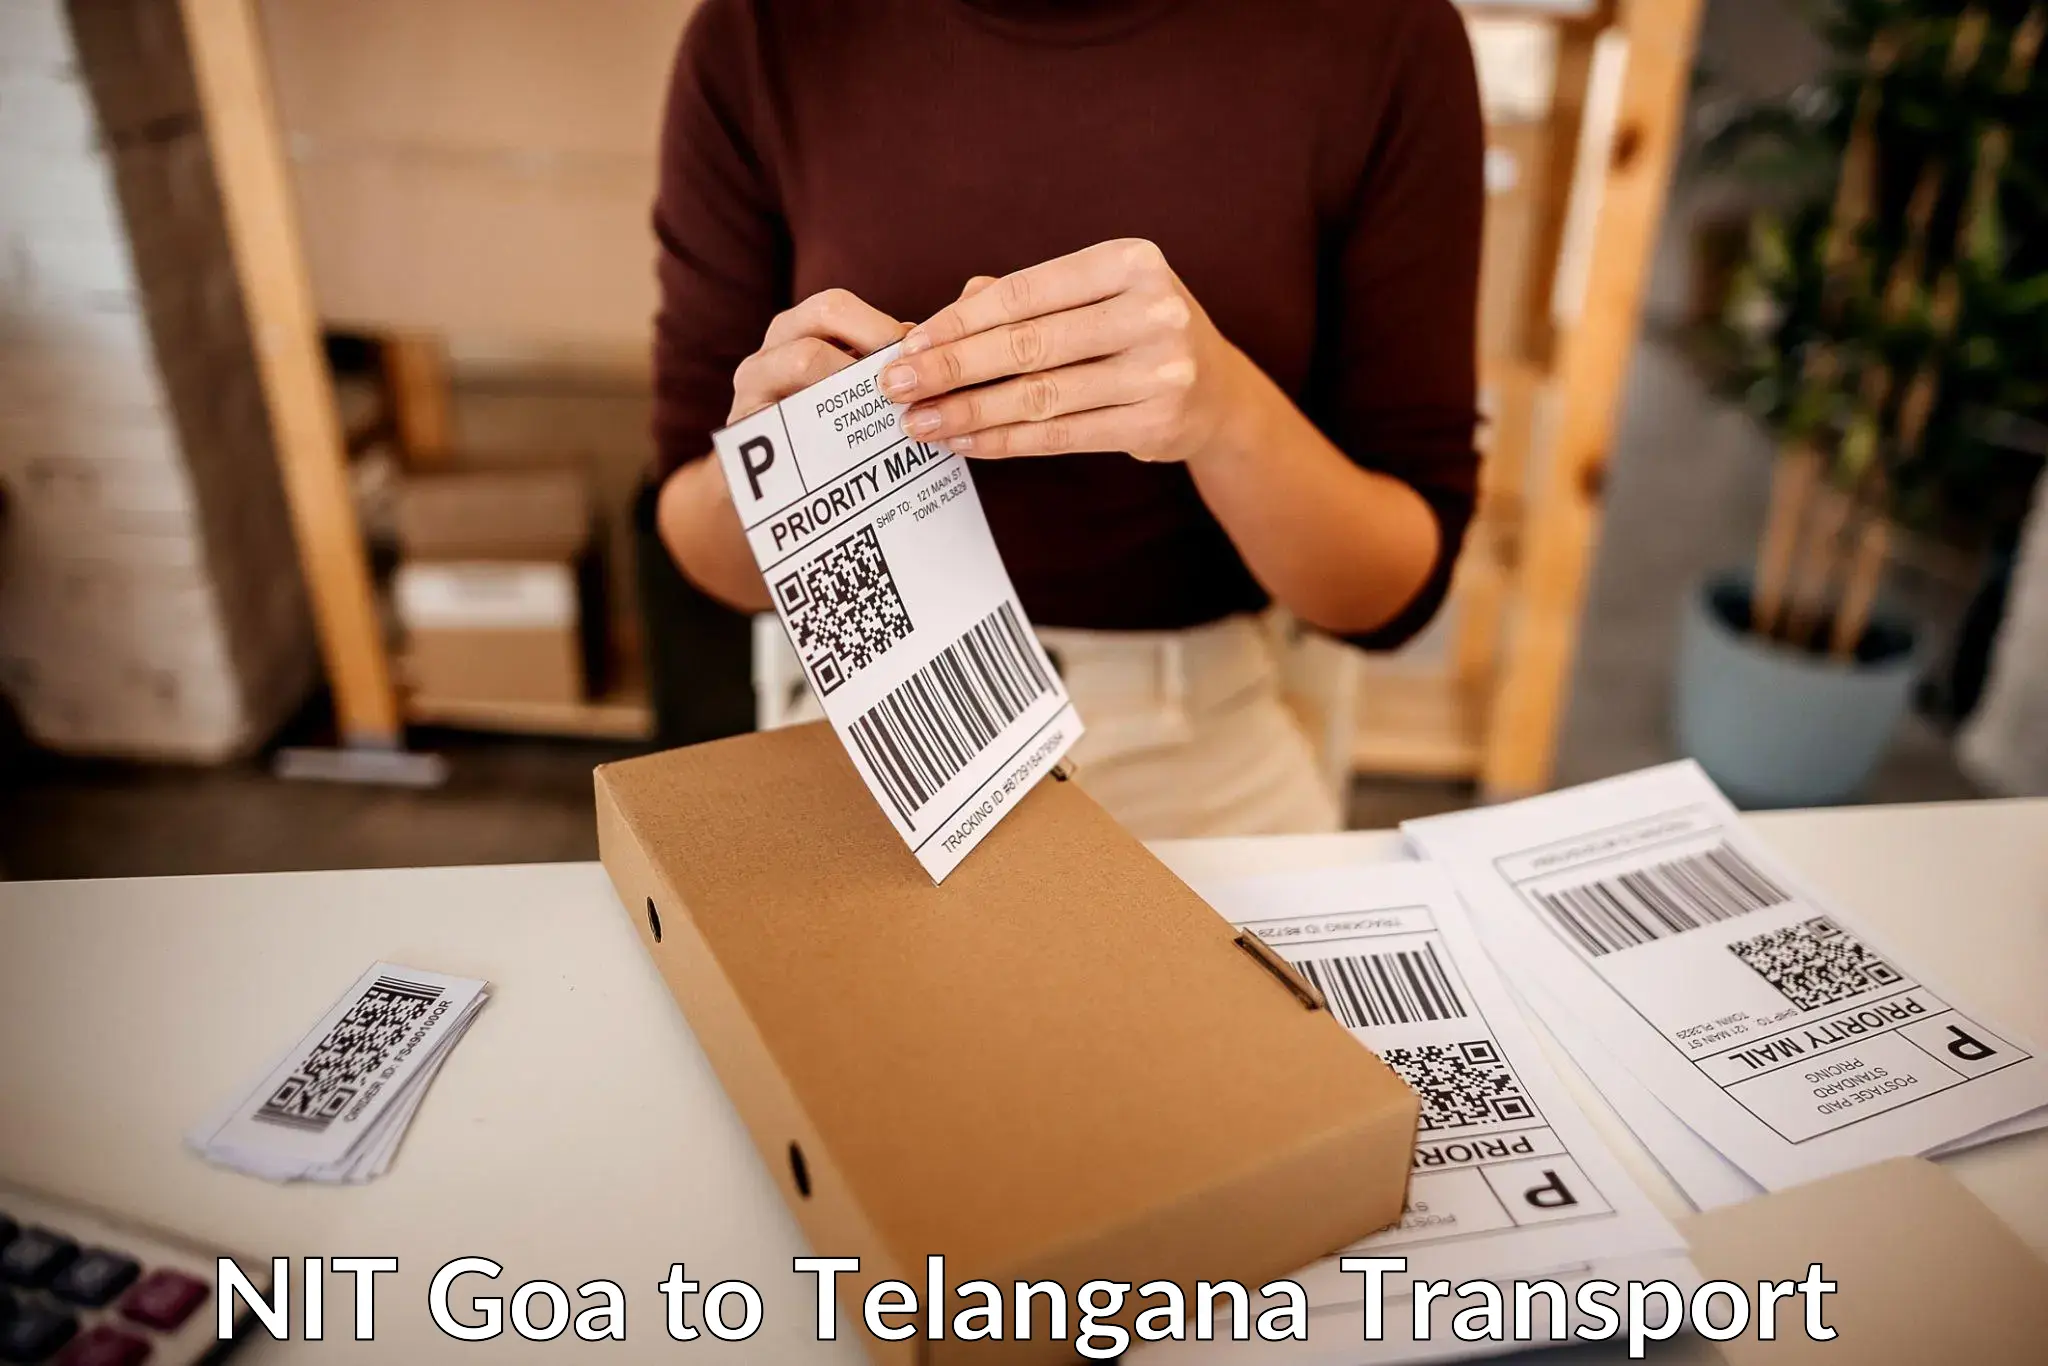 Road transport online services NIT Goa to Narmetta